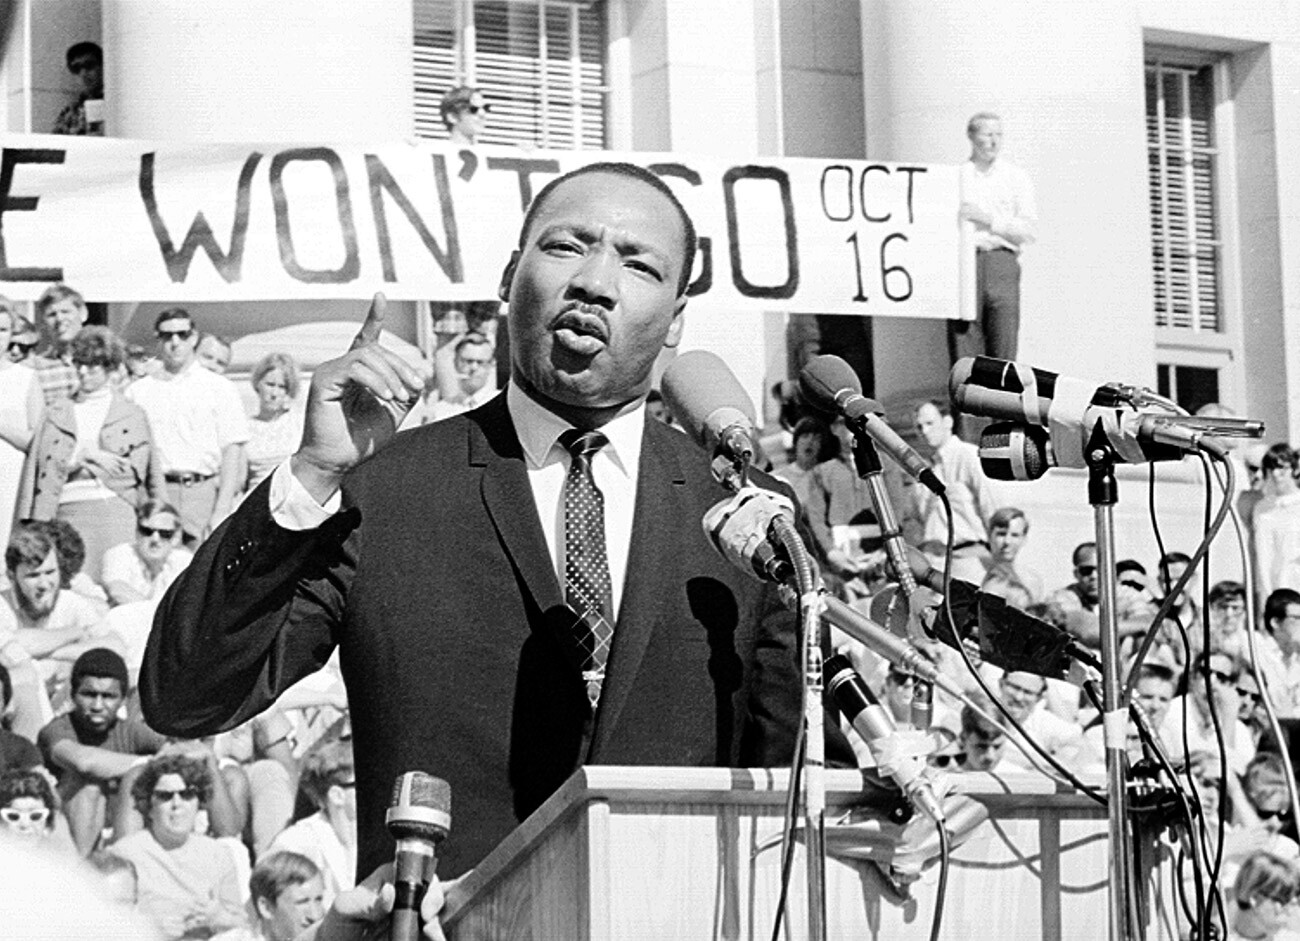 Civil rights leader Reverend Martin Luther King, Jr. delivers a speech to a crowd of approximately 7,000 people on May 17, 1967 at UC Berkeley's Sproul Plaza in Berkeley, California.